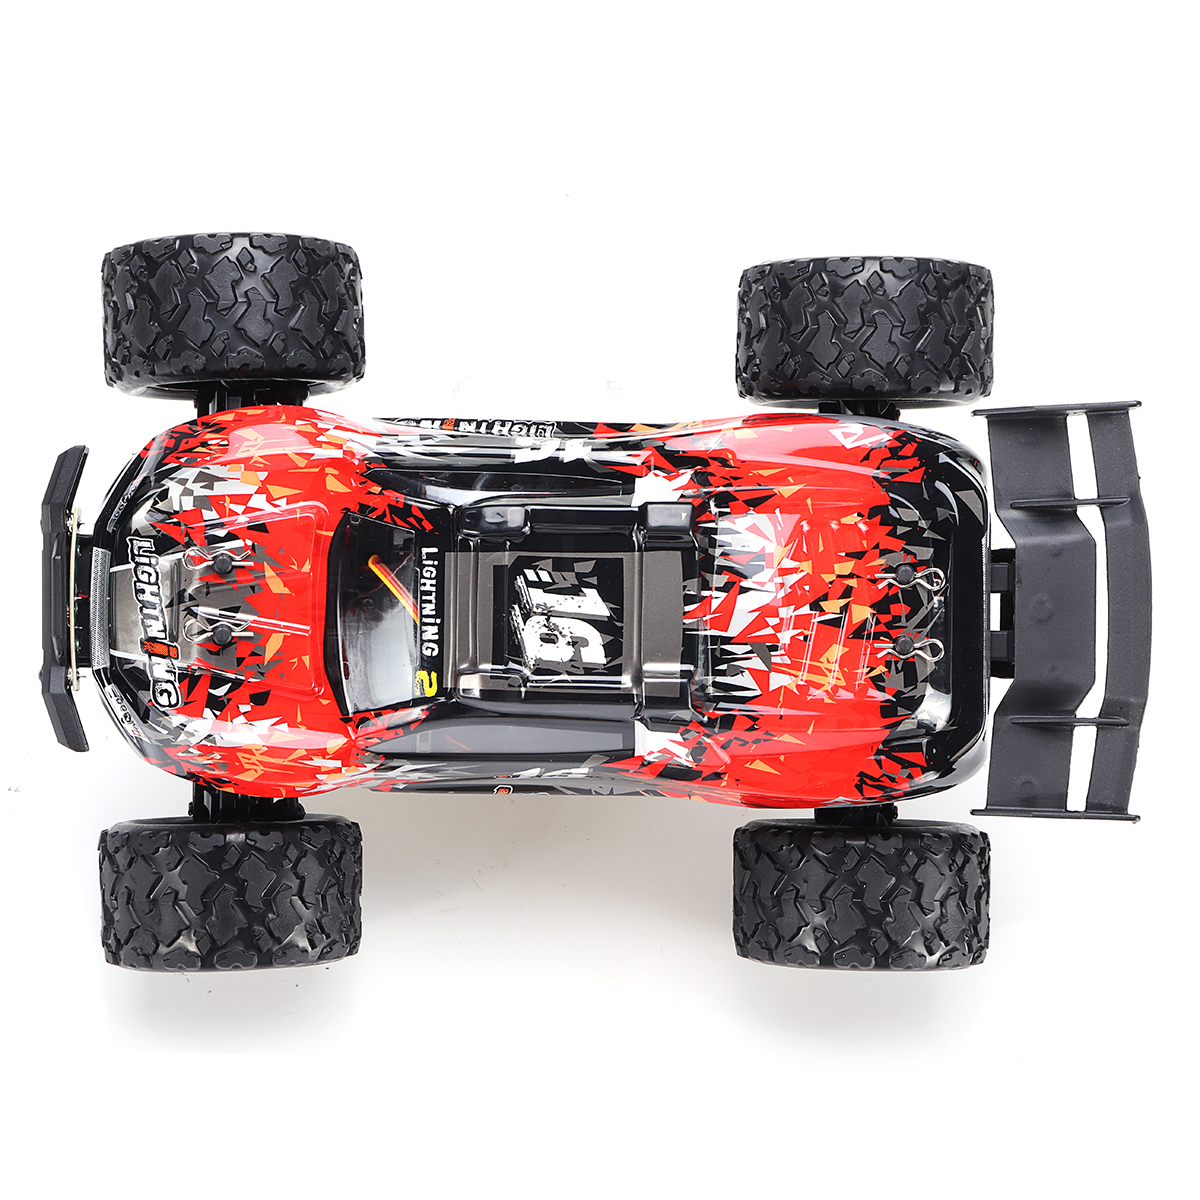 HS 18421 18422 18423 1/18 2.4G Alloy Brushless Off Road High Speed RC Car Vehicle Models Full Proportional Control - Photo: 12